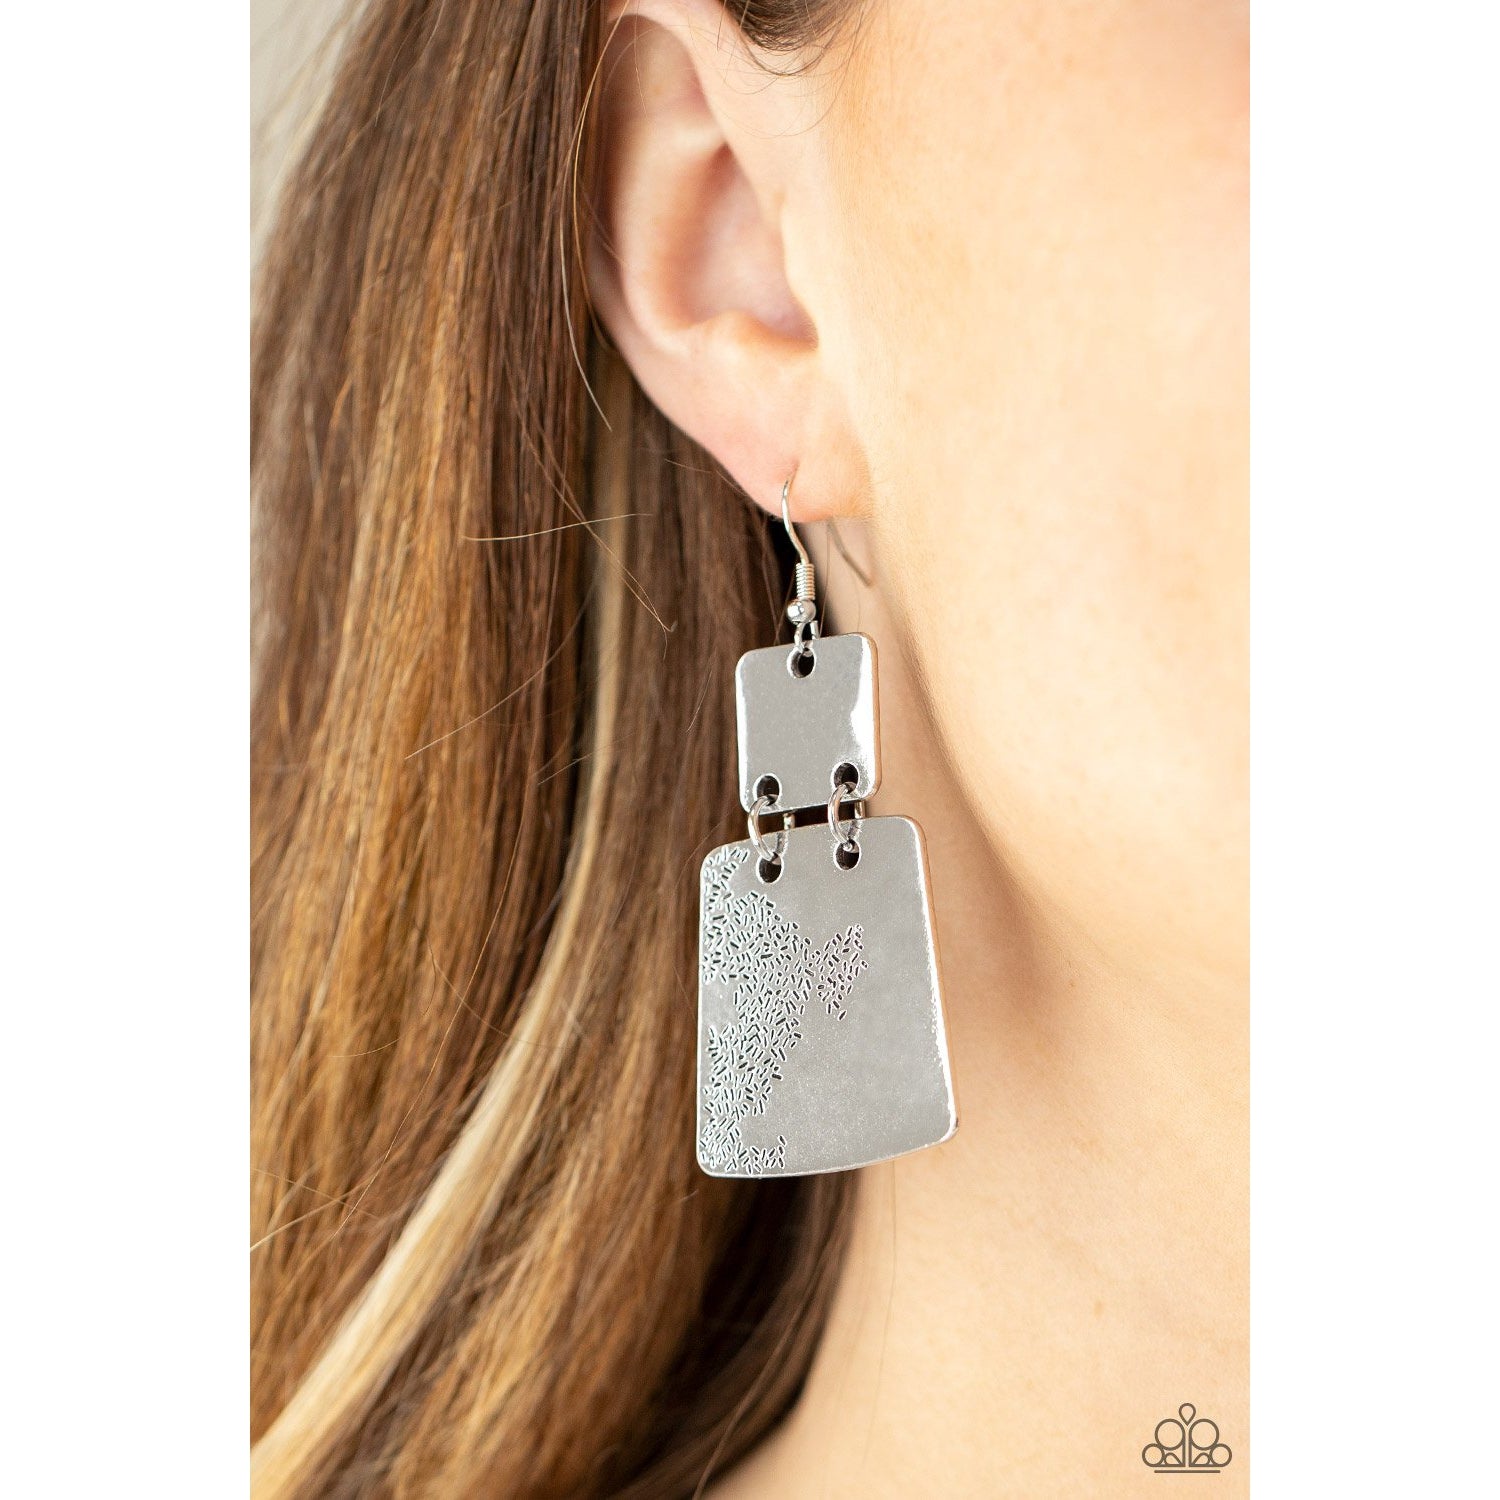 Tagging Along - Silver Earrings - Paparazzi Accessories - GlaMarous Titi Jewels